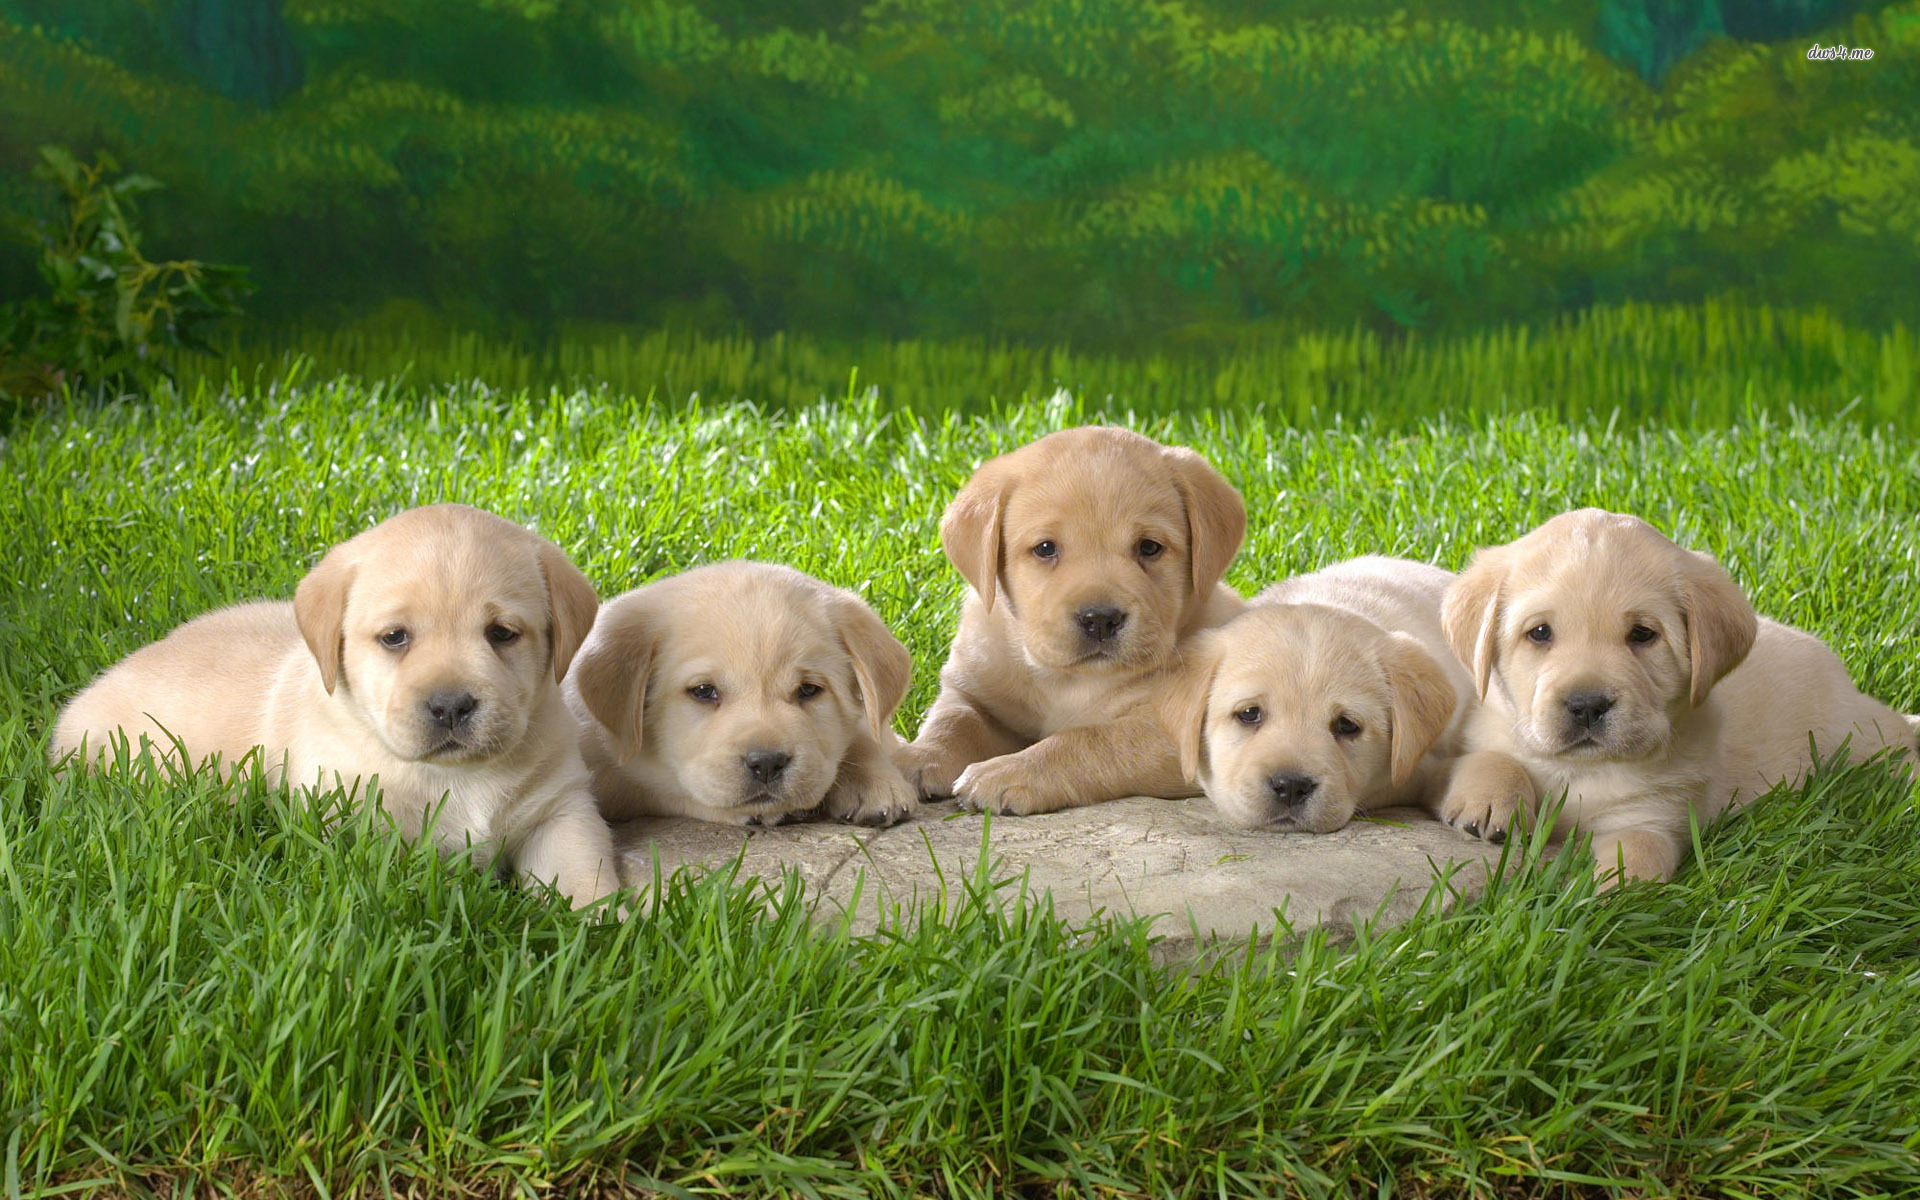 25 Cute Labrador Retriever Puppies Pictures And Images